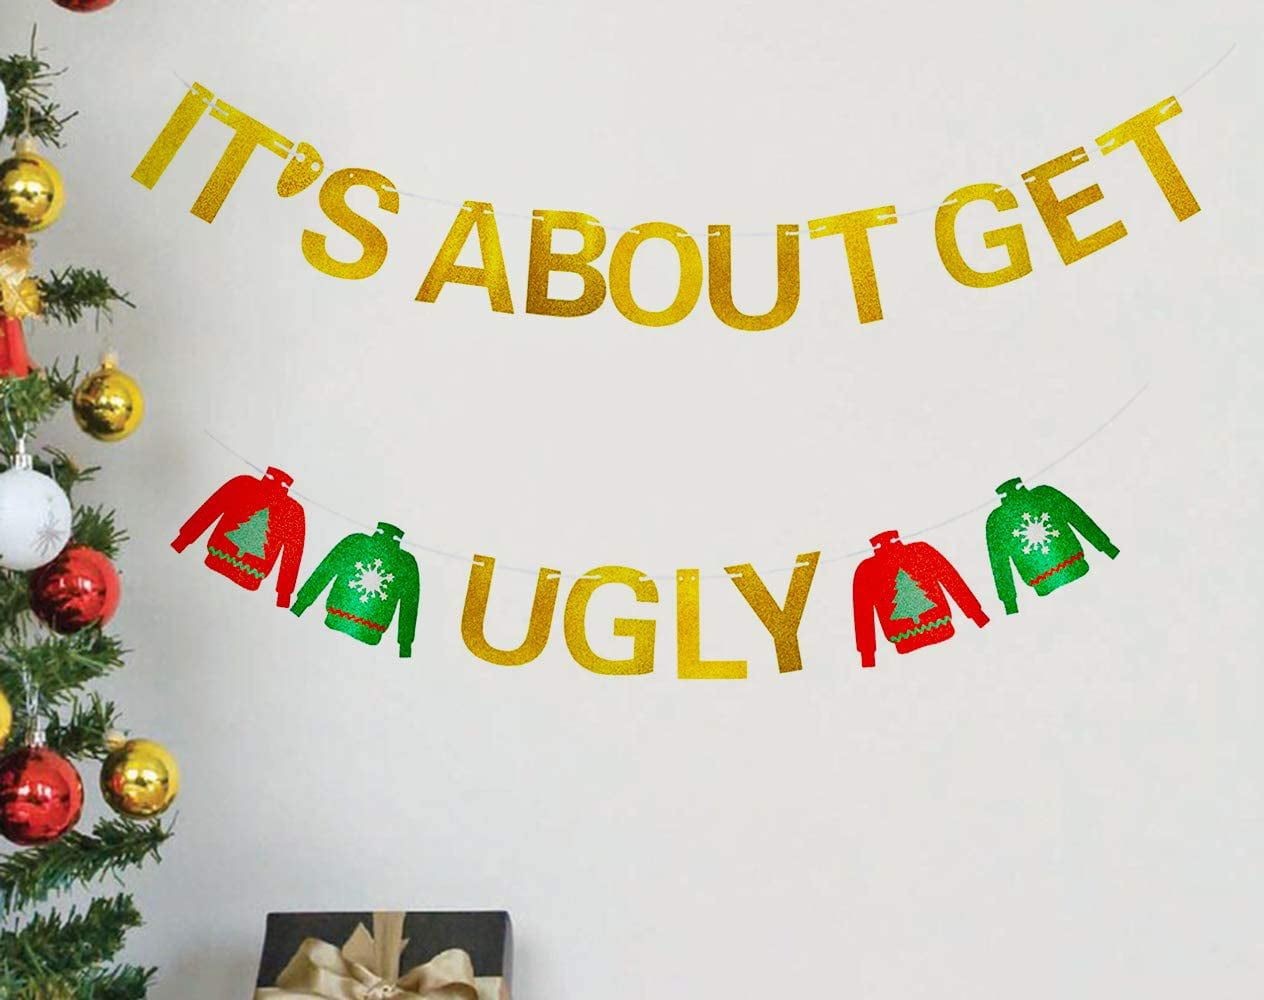 Ugly Christmas Sweater Party Decorations,Christmas Party Decorations,Ugly Sweater Decorations,Xmas Party Supplies,New Years Eve Party Decor Its About To Get Ugly Banner Gold Glitter